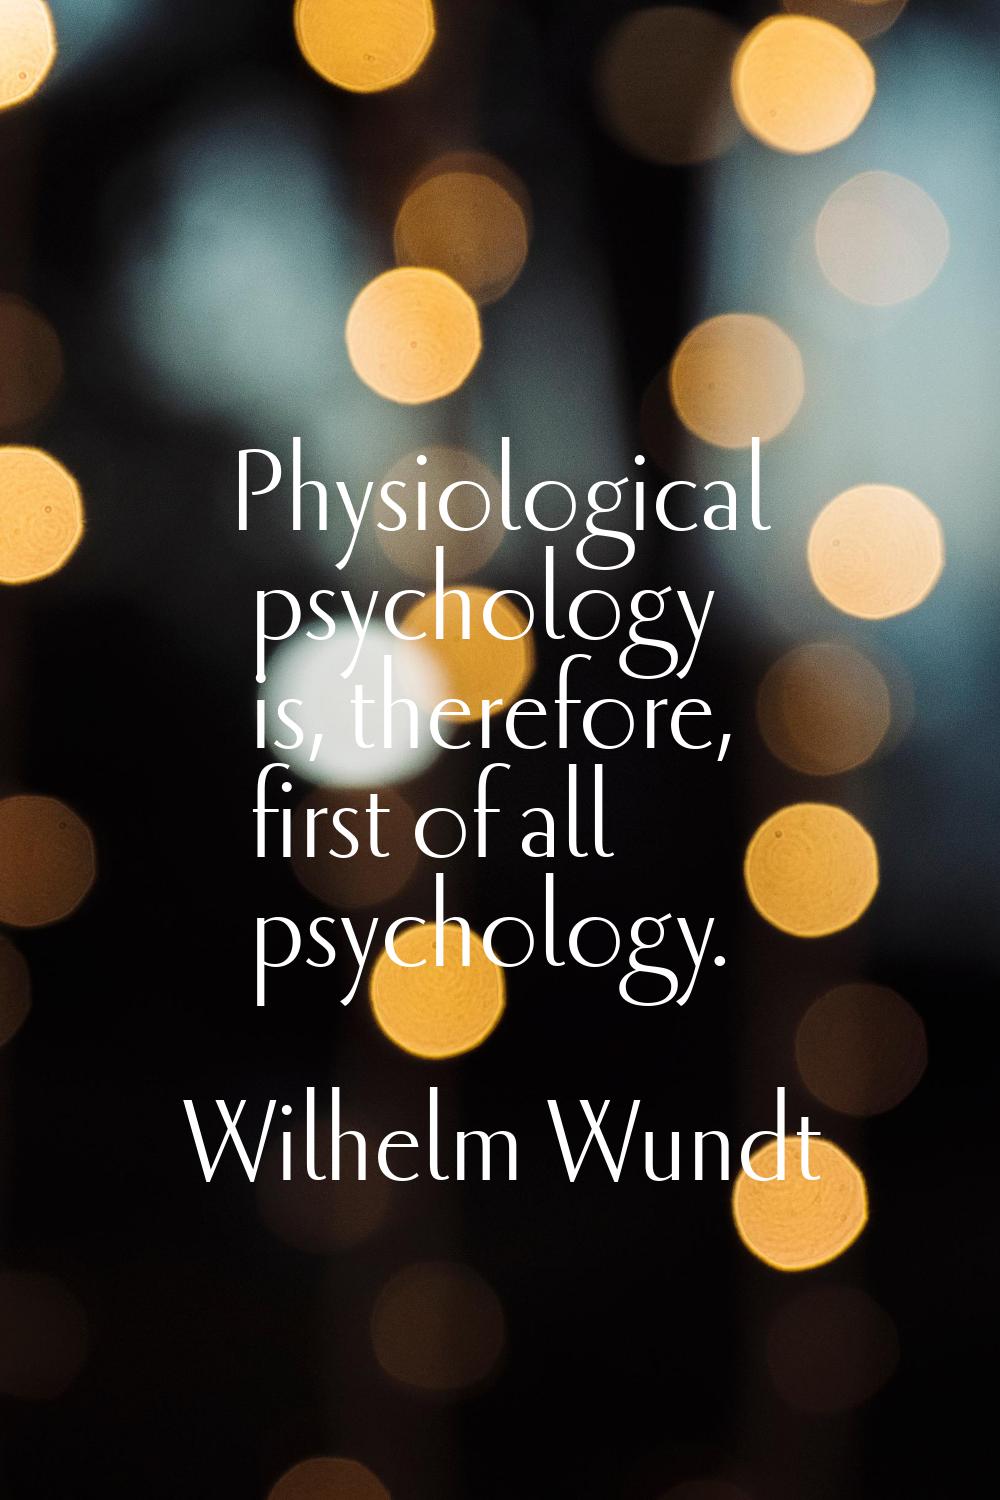 Physiological psychology is, therefore, first of all psychology.